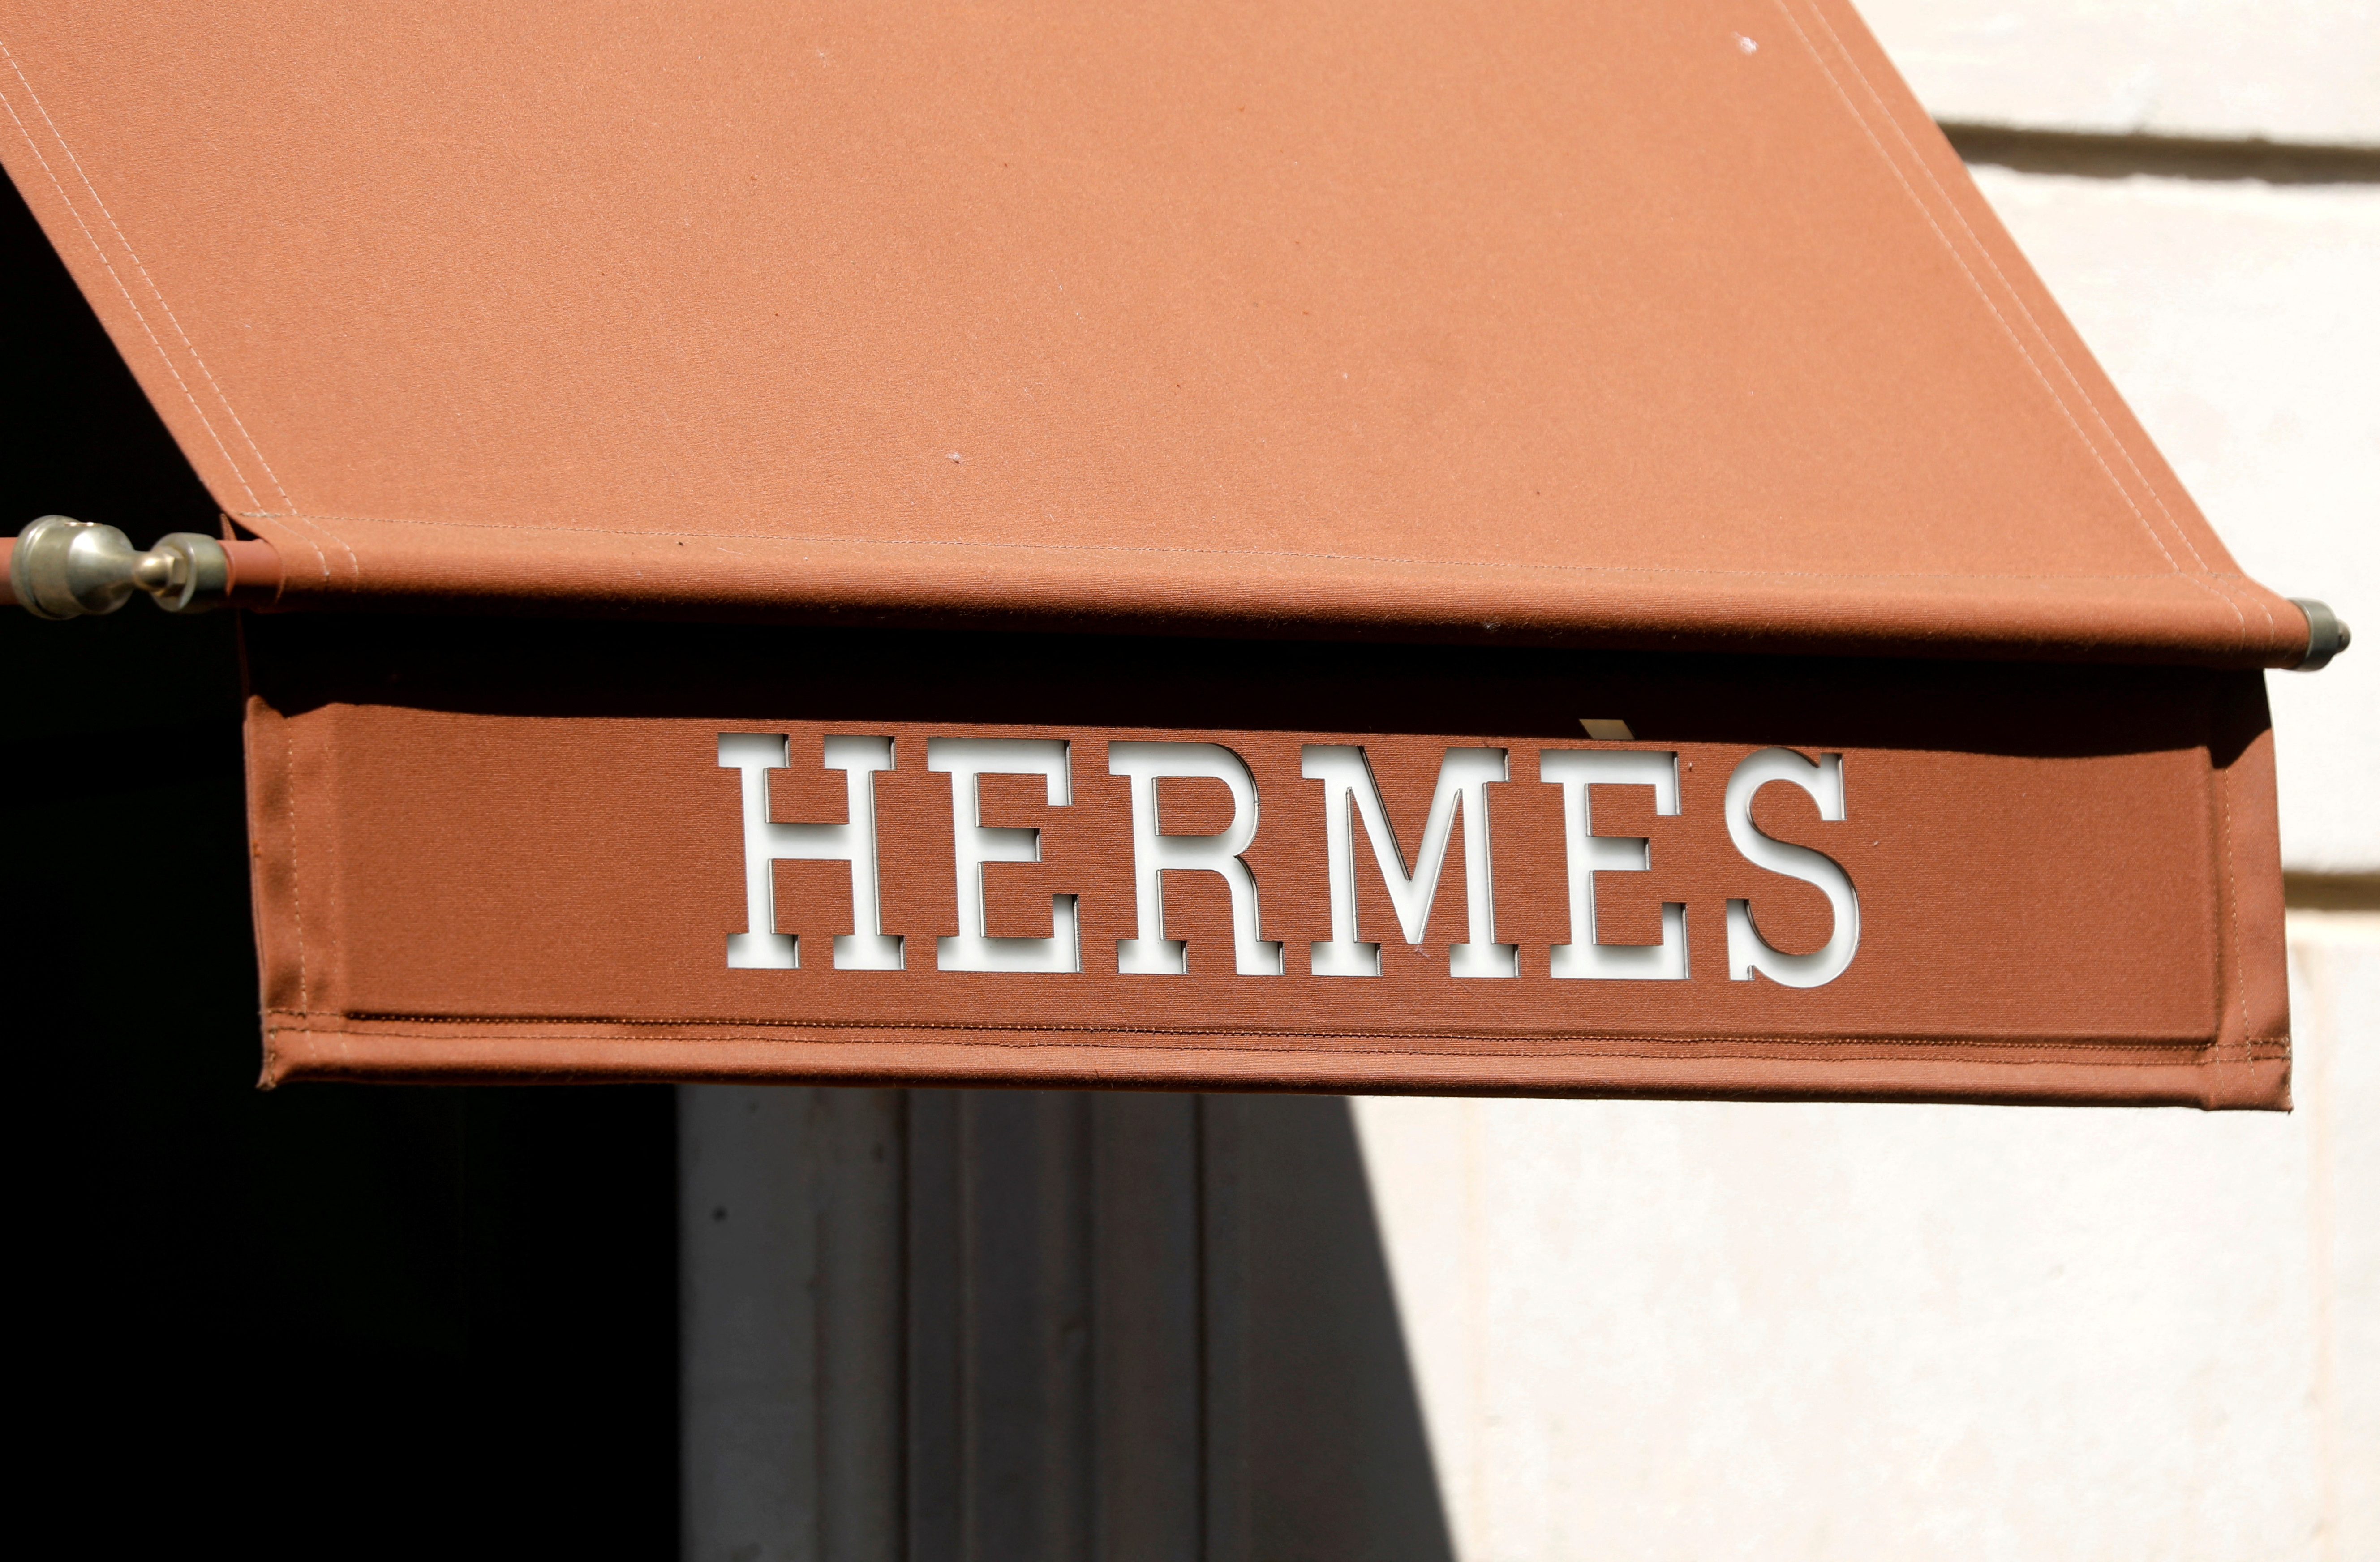 Has Hermès gone too far with its exclusive sales tactics